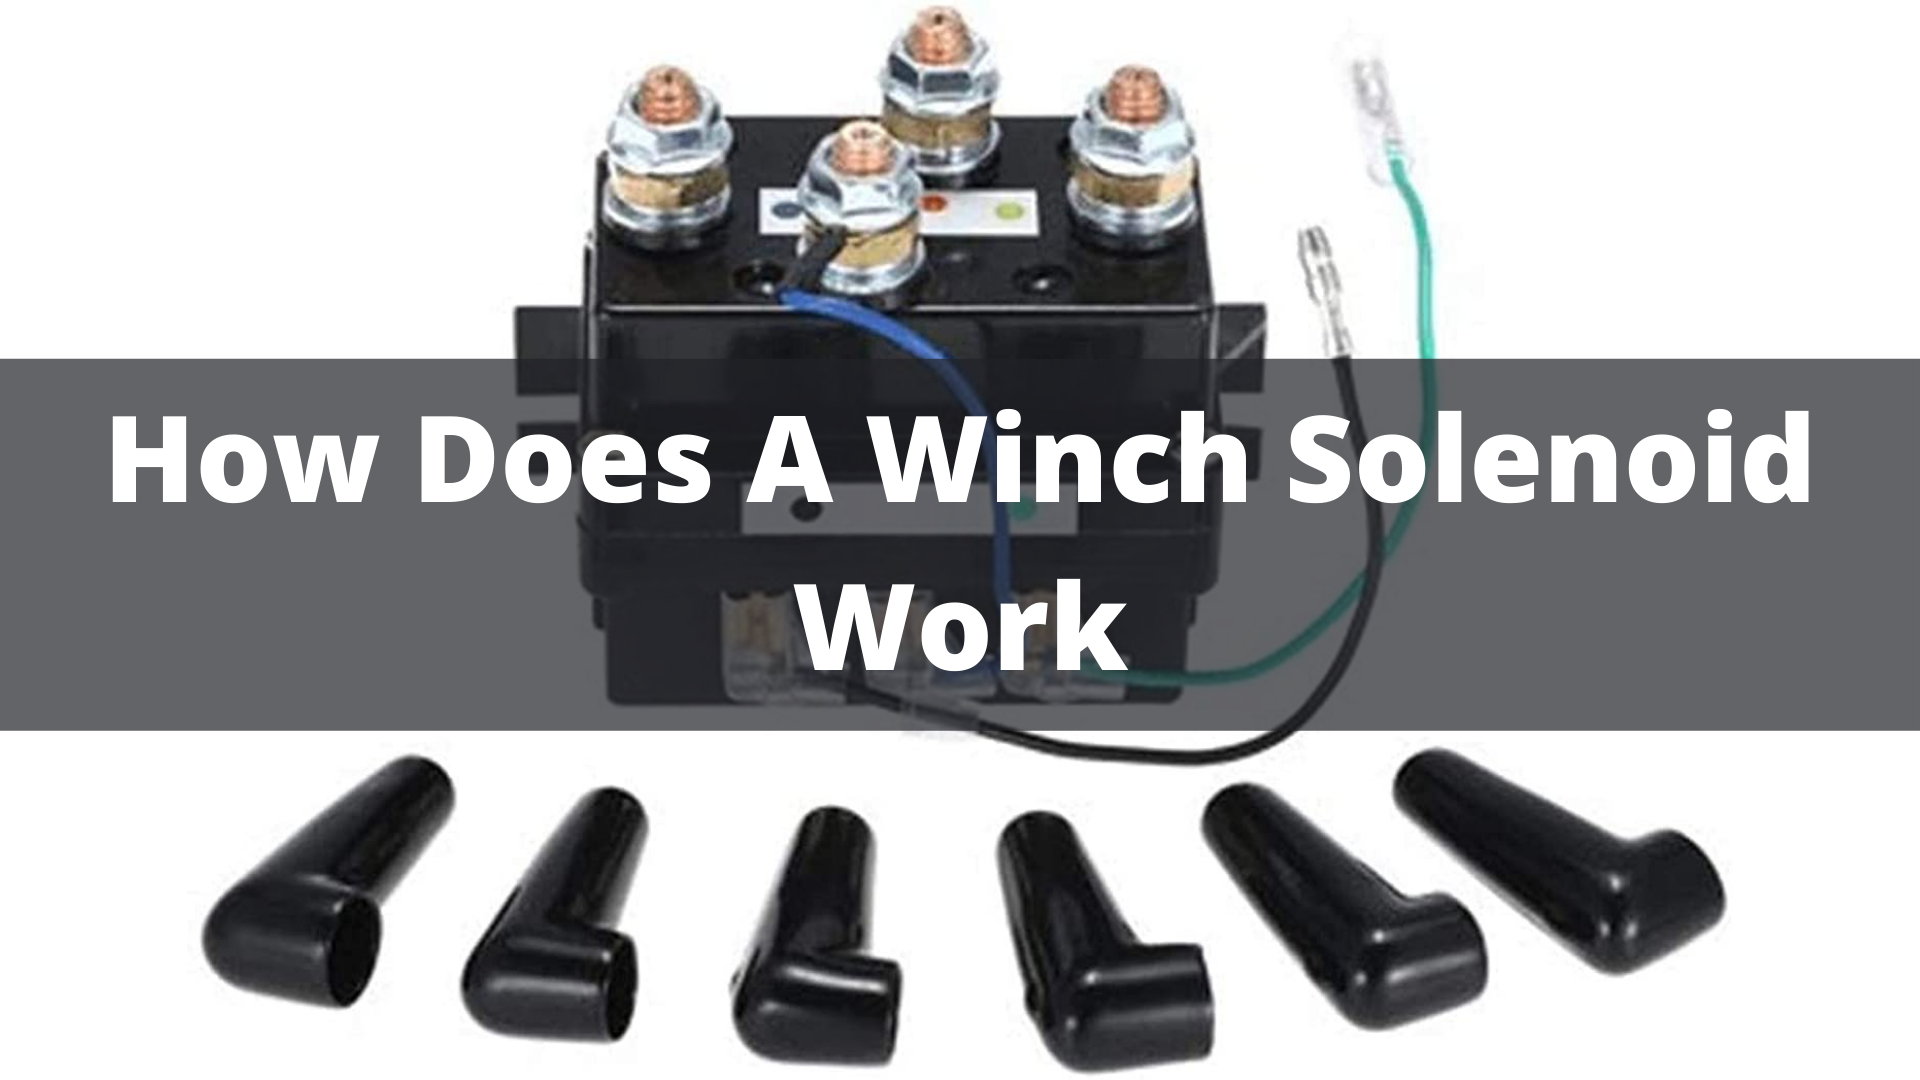 How Does A Winch Solenoid Work